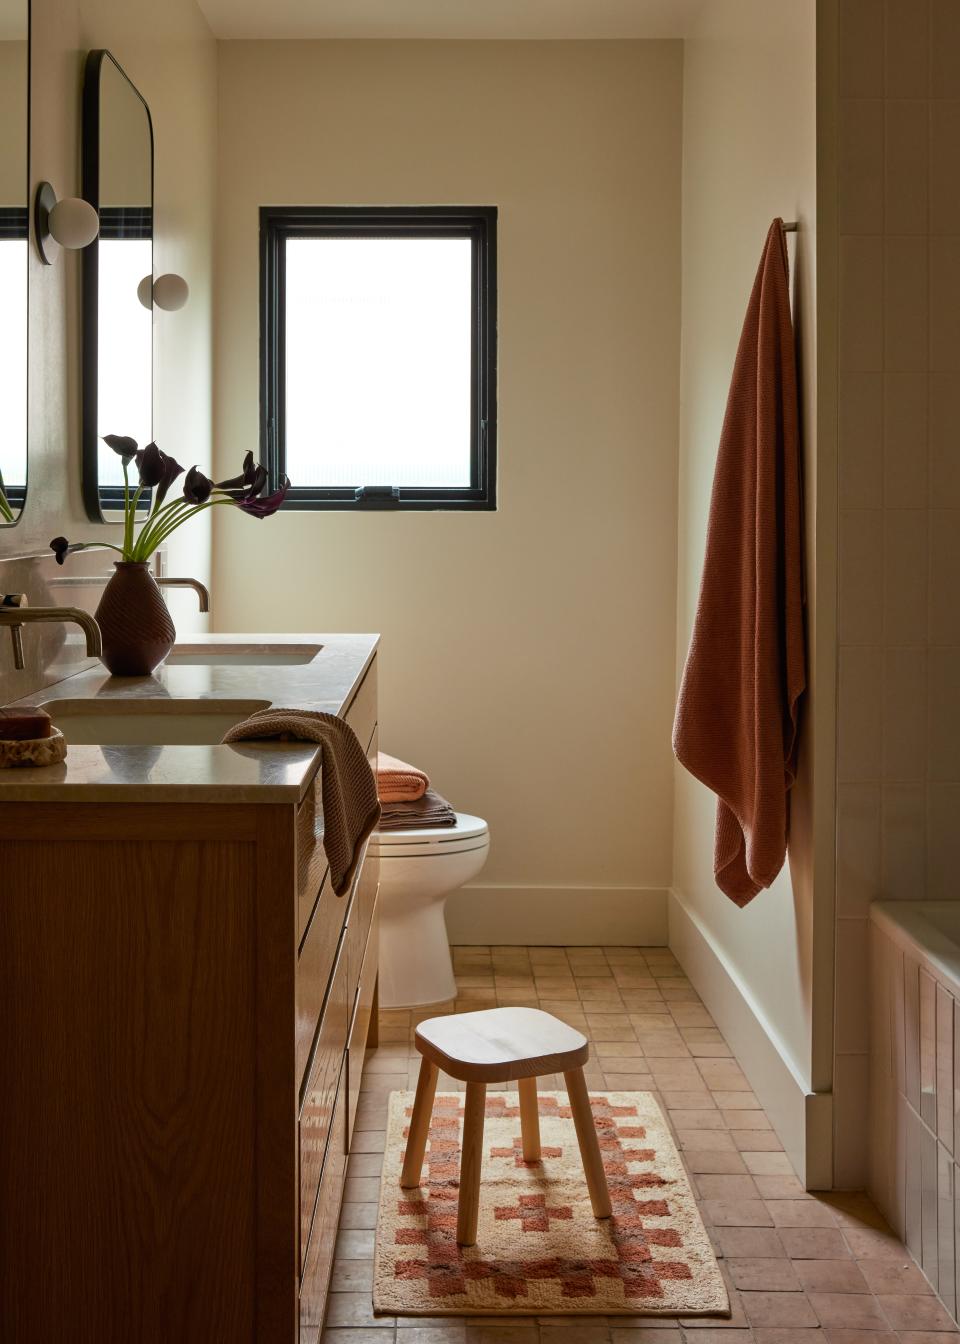 The designers updated the primary bathroom with a double vanity and sleek fixtures and finishes. Sconces by Matt Alford Studio elevate the walls. The mirrors, stool, and rug are from West Elm, Etsy, and Leif respectively. Towels are Coyuchi.